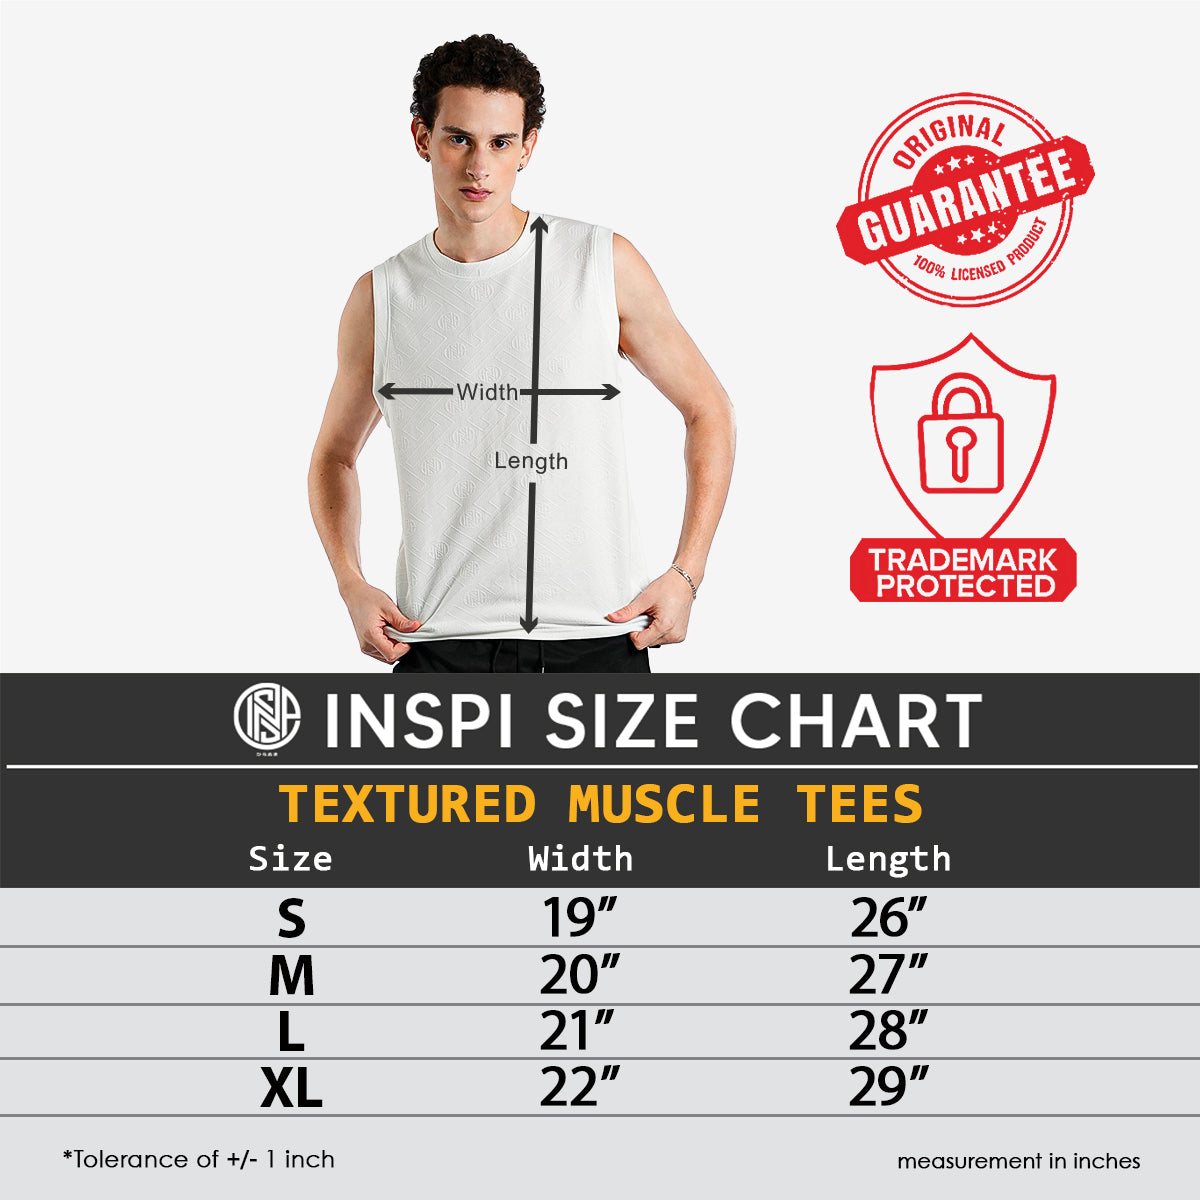 INSPI Textured Muscle Tee Originals White